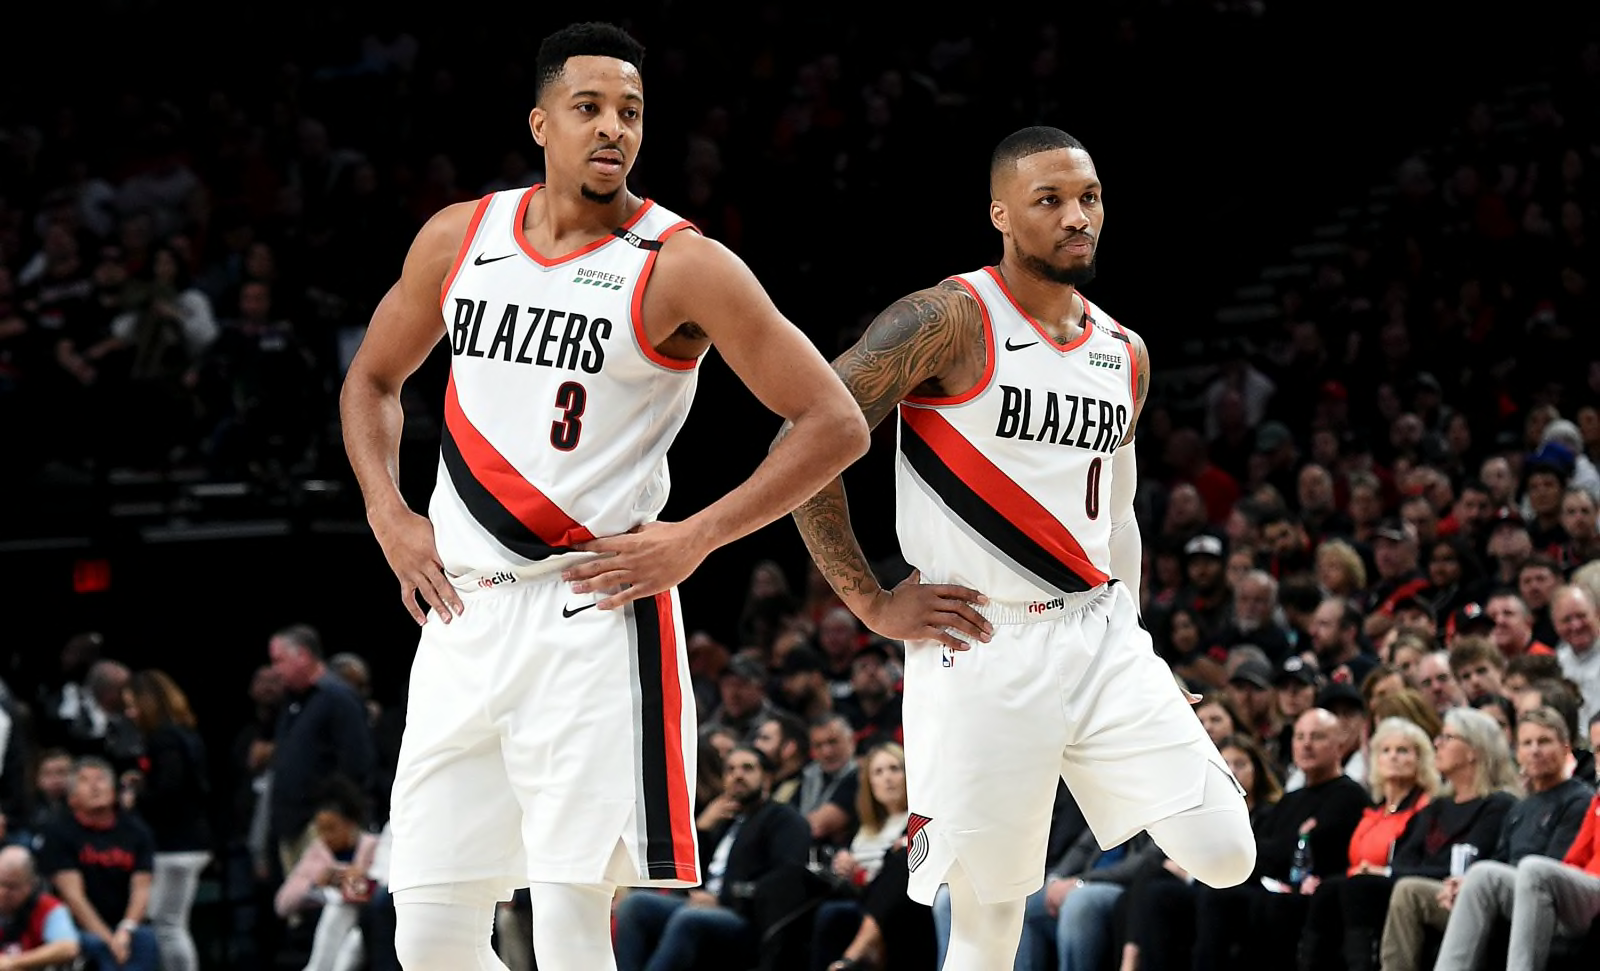 Portland Trail Blazers Who is the team's thirdbest player?